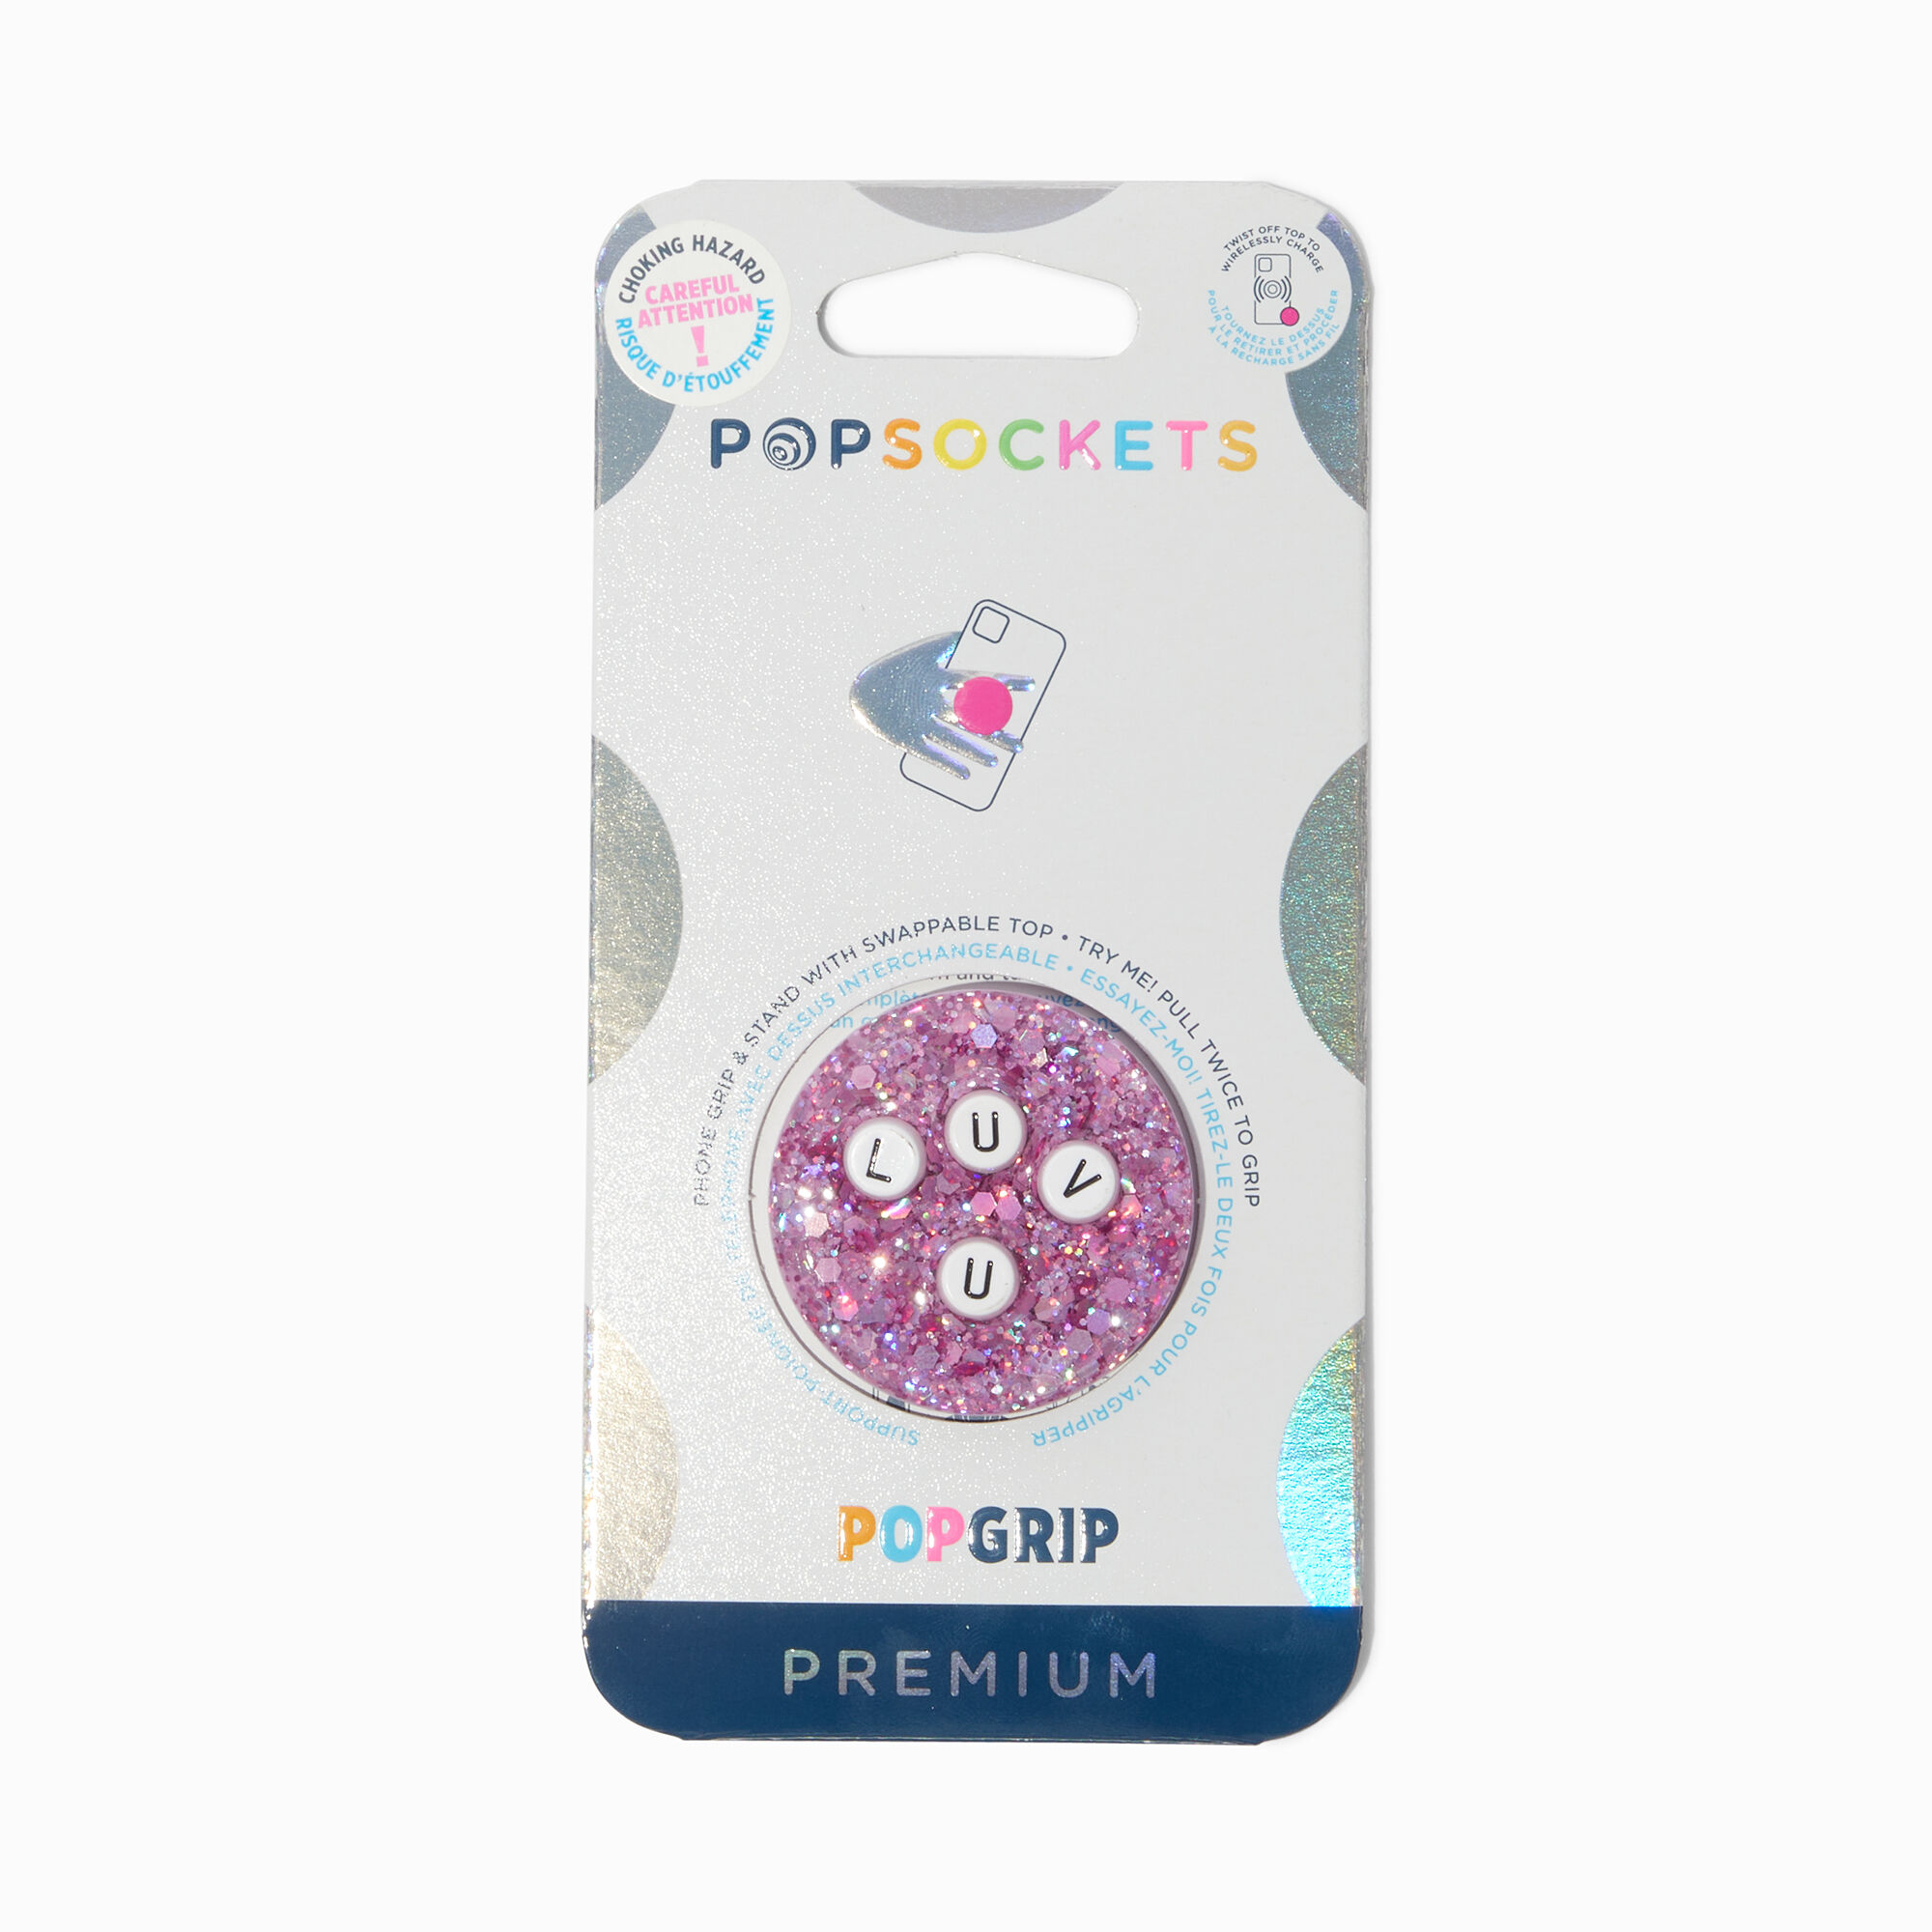 View Claires Popsockets Swappable Popgrip Luv U information